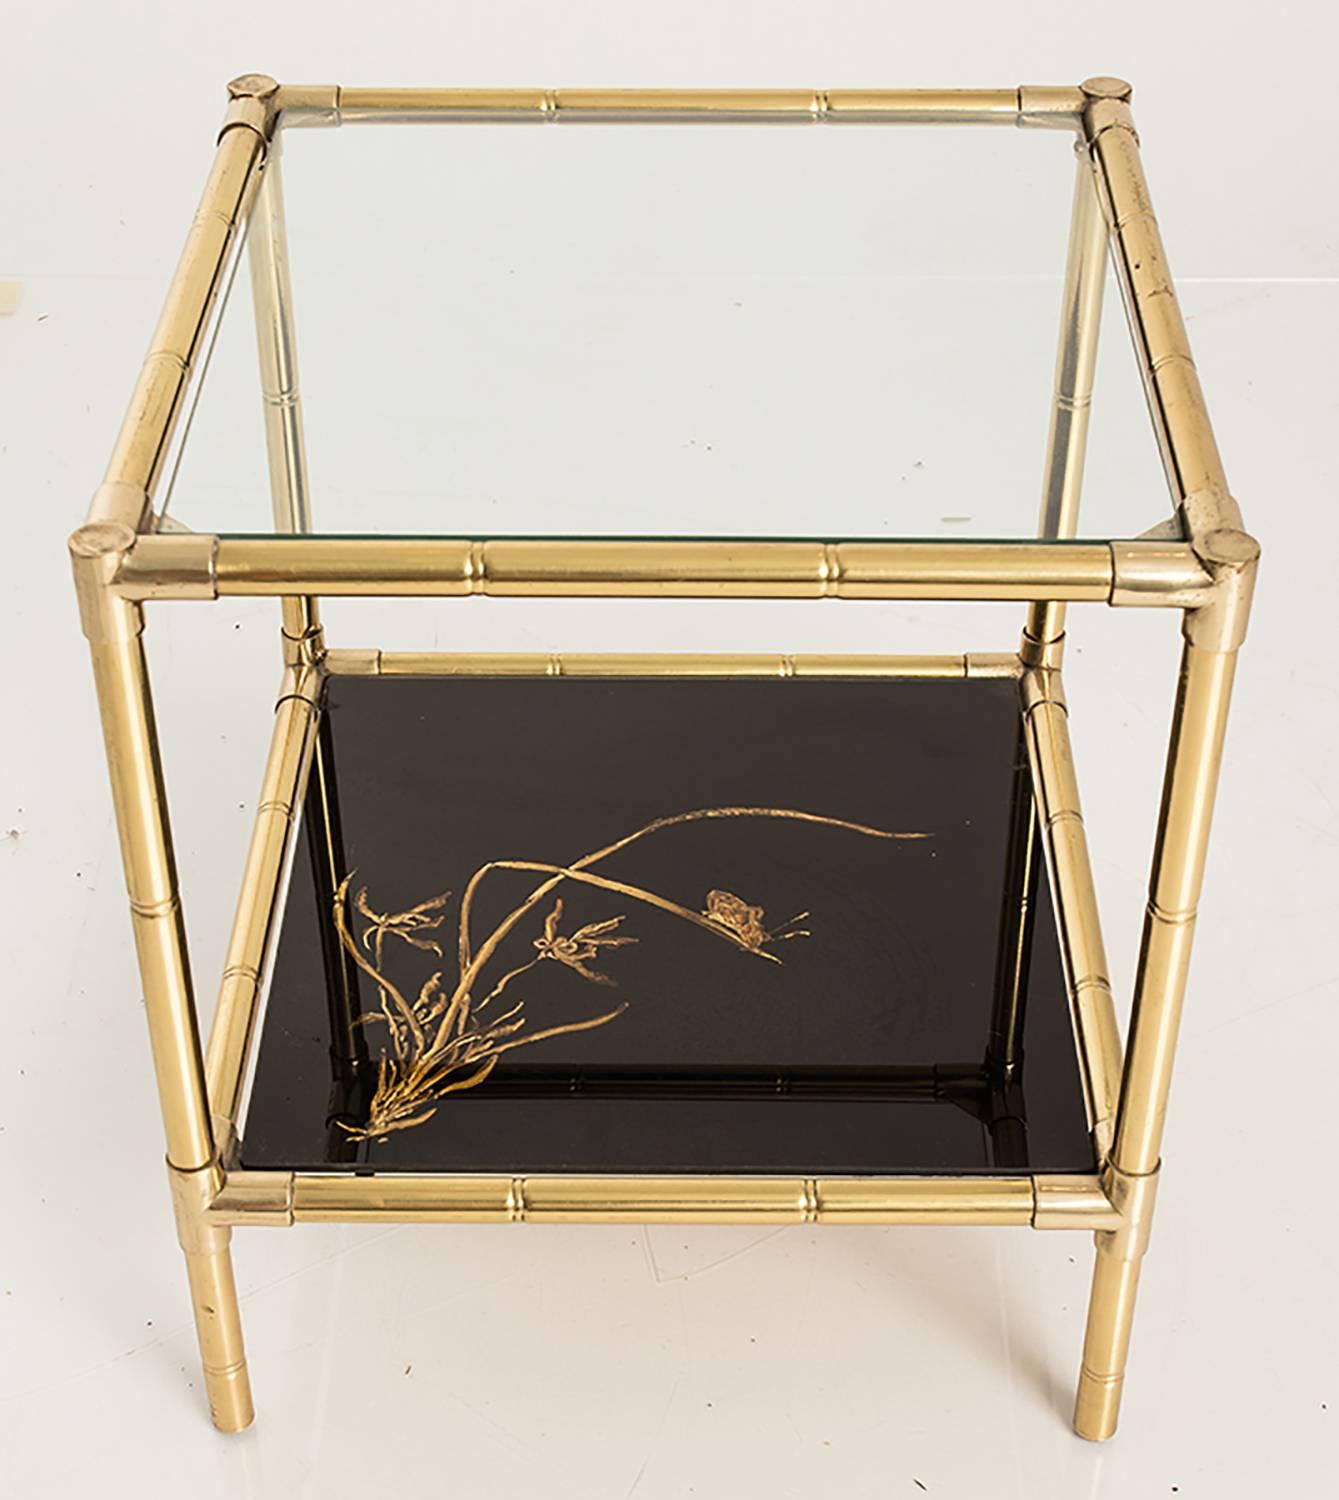 Pair of brass and reverse painted glass side tables with Chinoserie details and a faux bamboo motif.